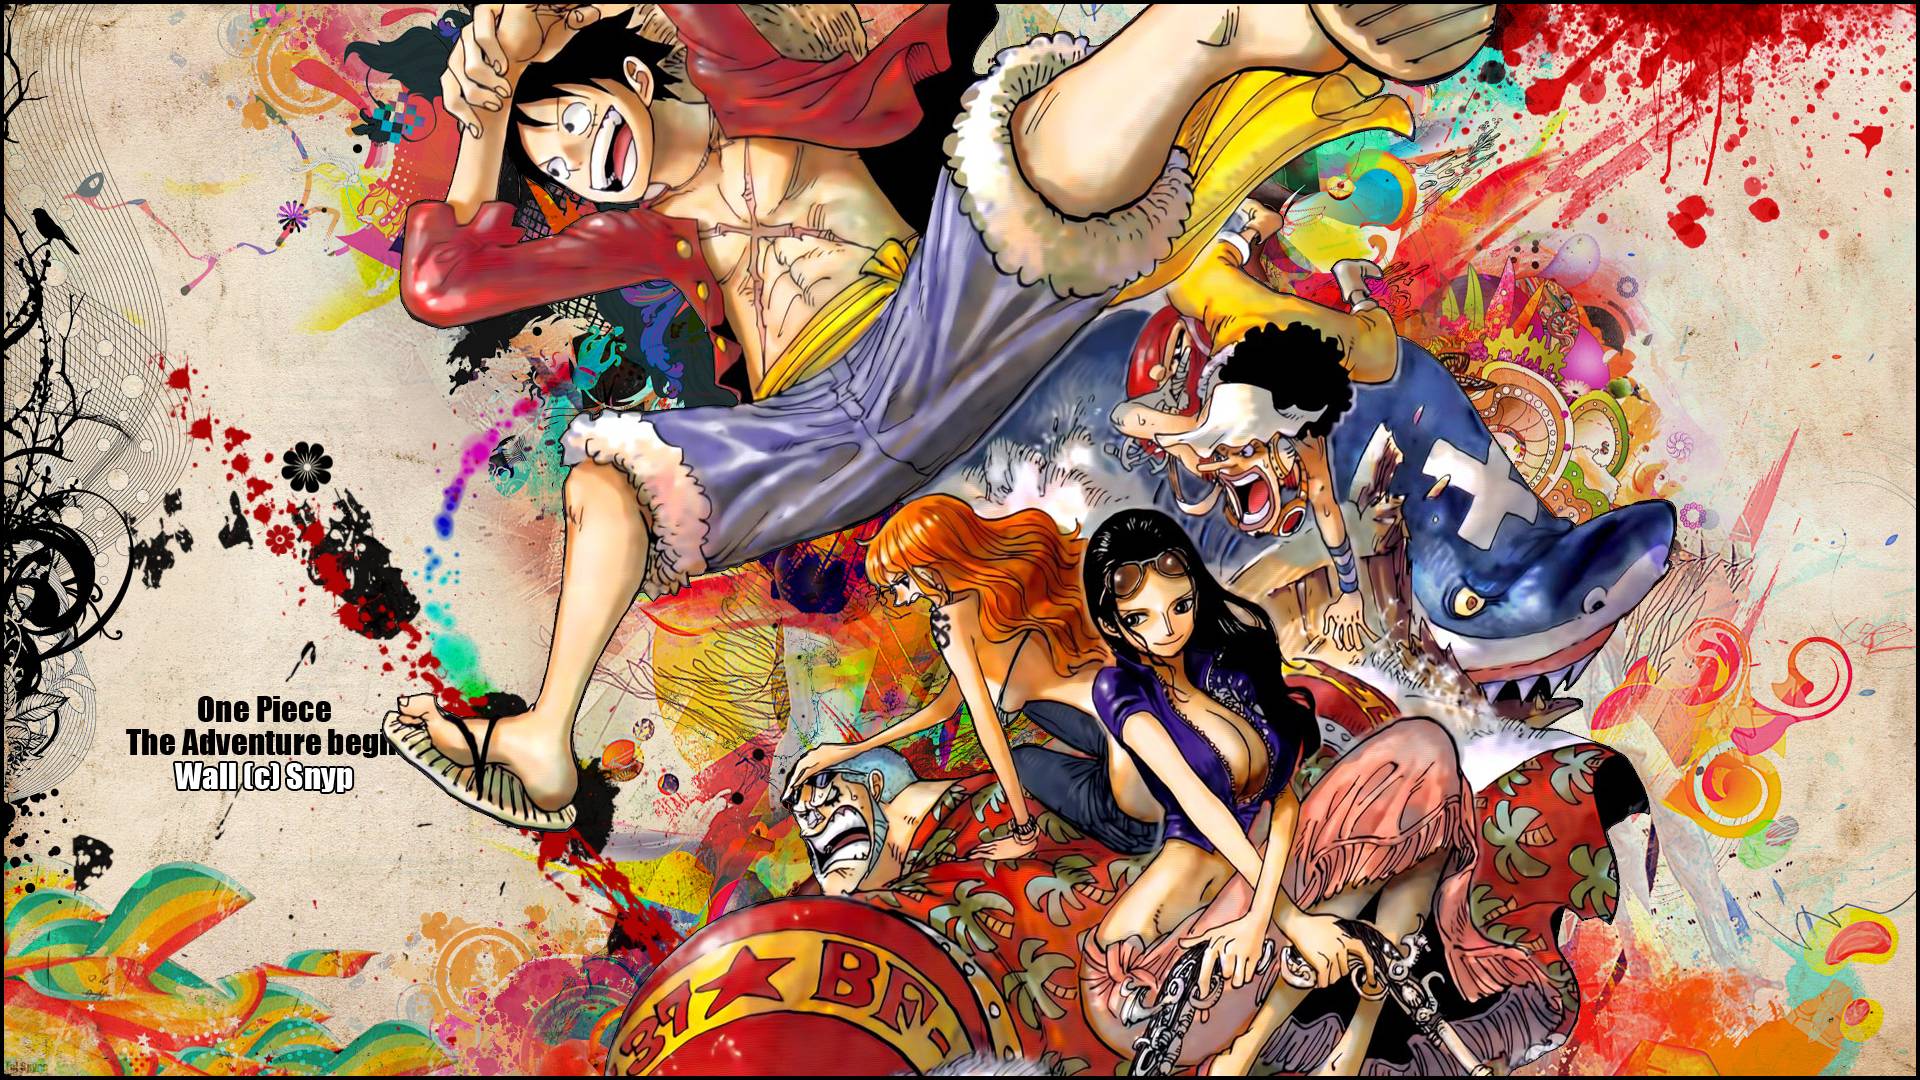 One piece wallpapers